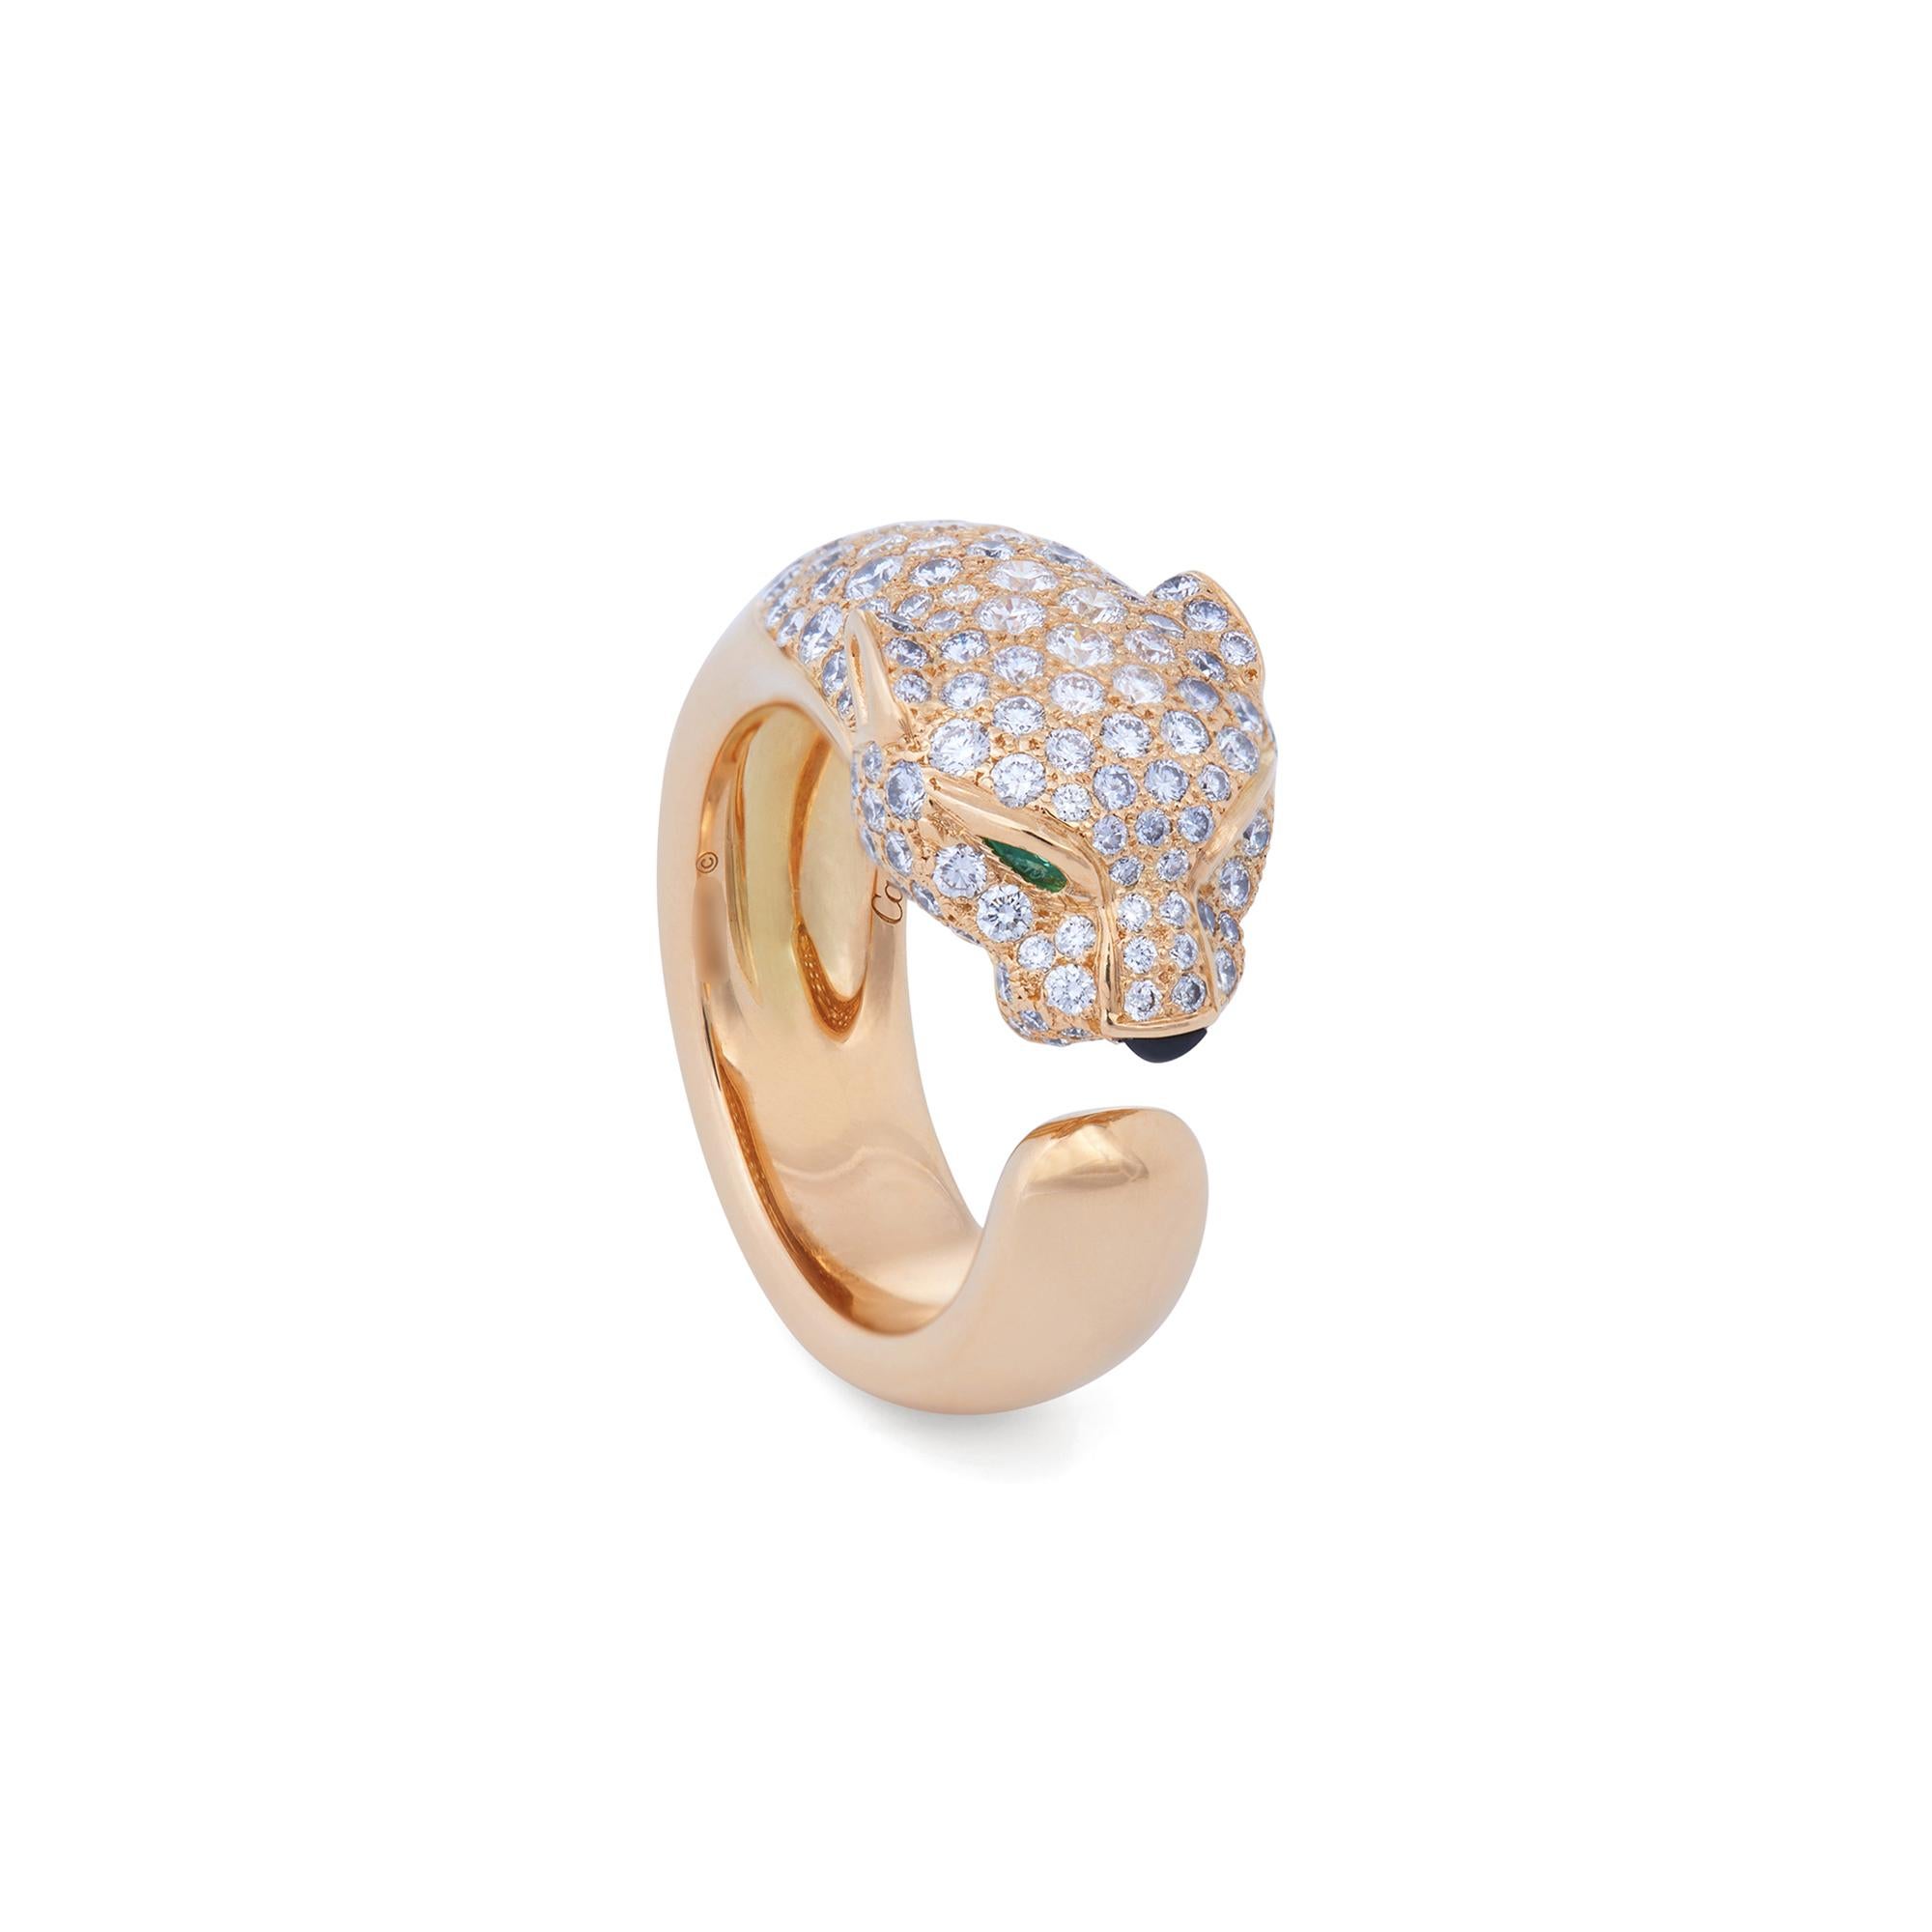 Authentic Panthère de Cartier ring crafted in 18 karat yellow gold and set with approximately 1.15 carats of round brilliant cut diamonds (E-F color, VS clarity) throughout the head and of mane of the panther. The panther head is completed with